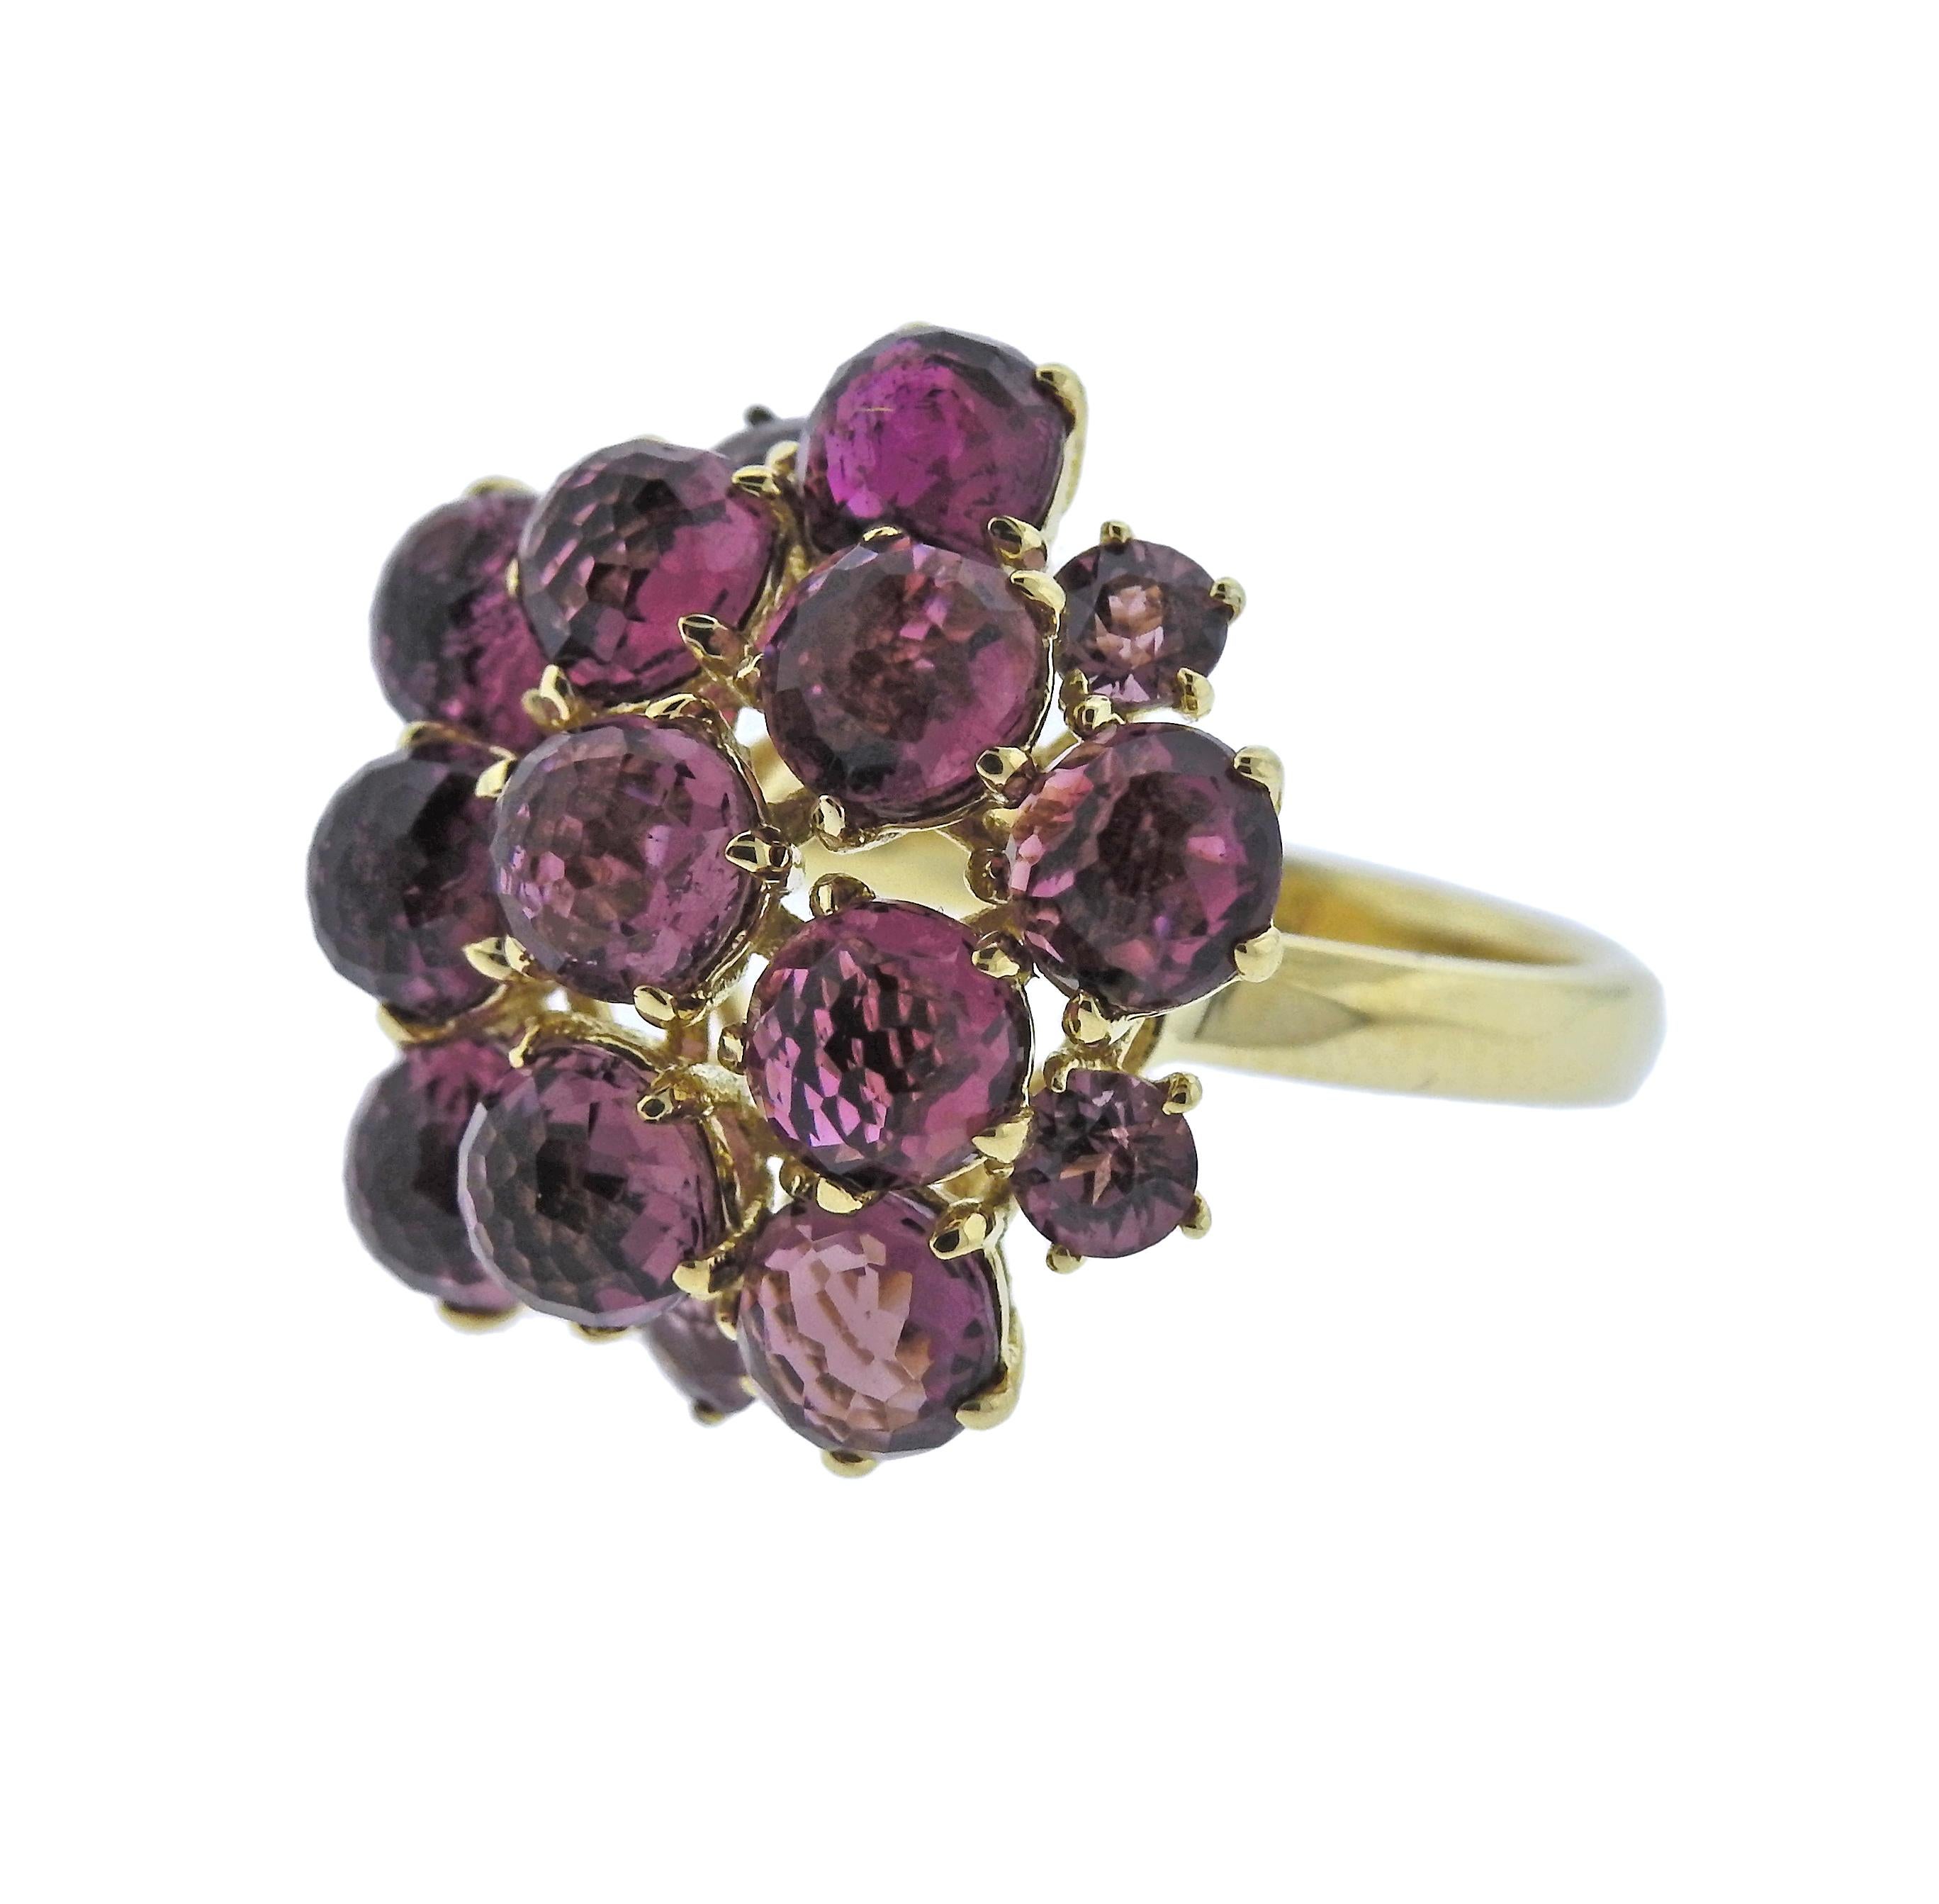 18k gold cocktail ring by Ippolita, set with pink tourmalines and sapphires. Ring size 7 1/4, ring top is 22mm x 23mm, weighs 10.3 grams. Marked Ippolita and 18k.  Retail $3995. Come with Pouch.